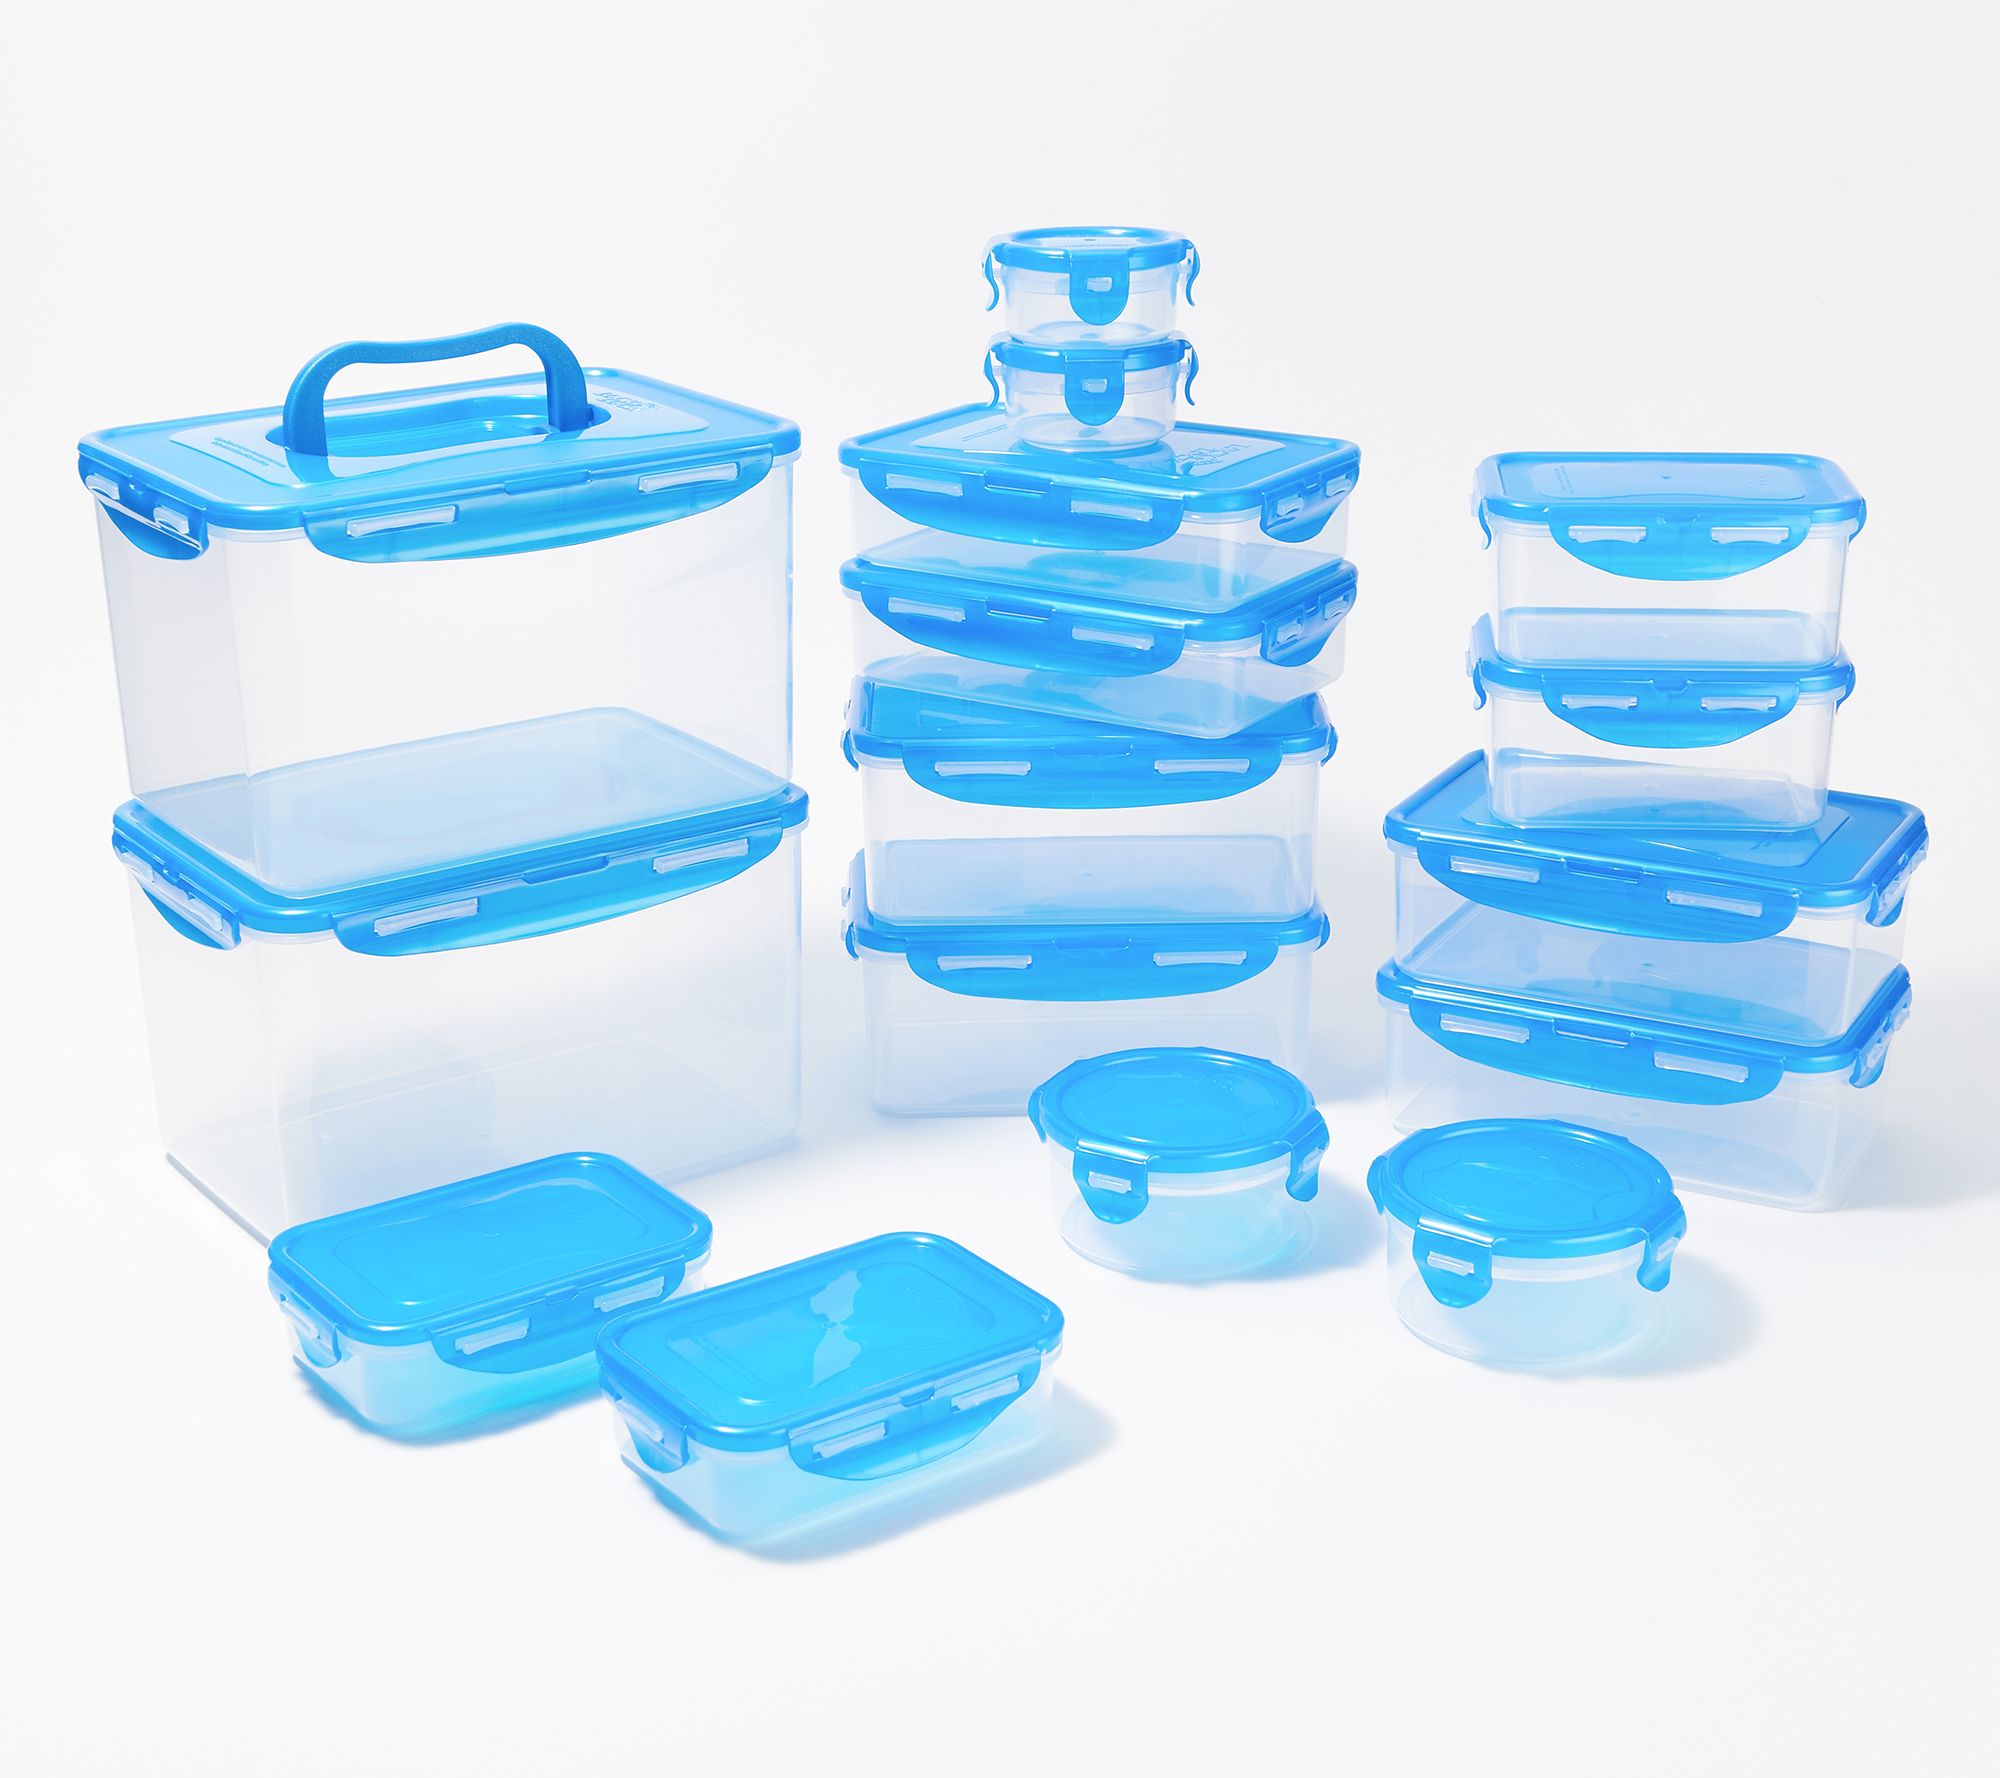 150 Pack] 40 oz White Meal Prep Containers Round Bowls with Lids, Food  Storage Bento Box, Microwavable, Premium Bowl, Stir Fry, Lunch Boxes, BPA  Free, Freezer/Dishwasher Safe